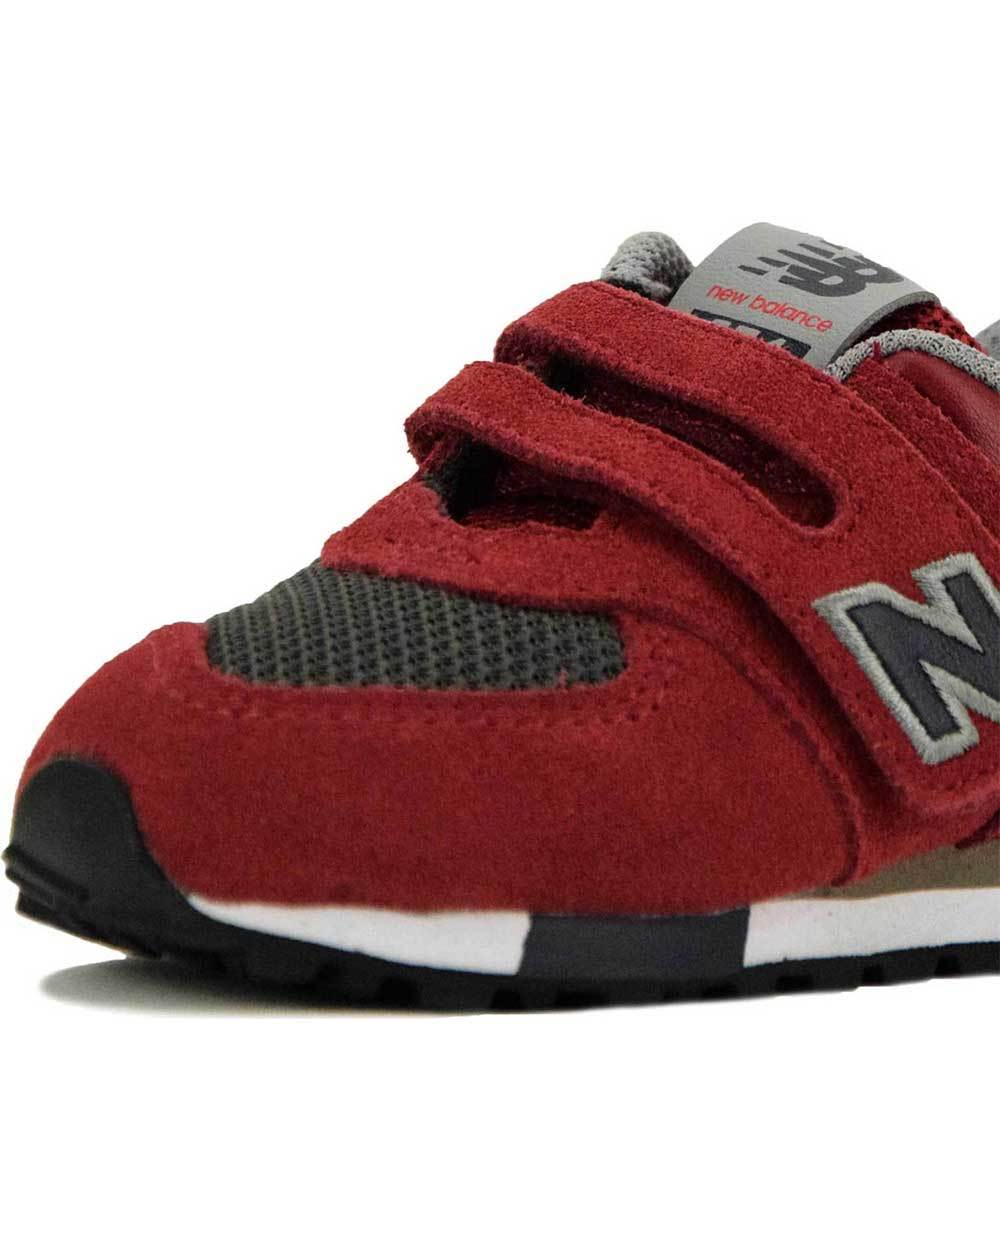 New Balance 574 Red and Black